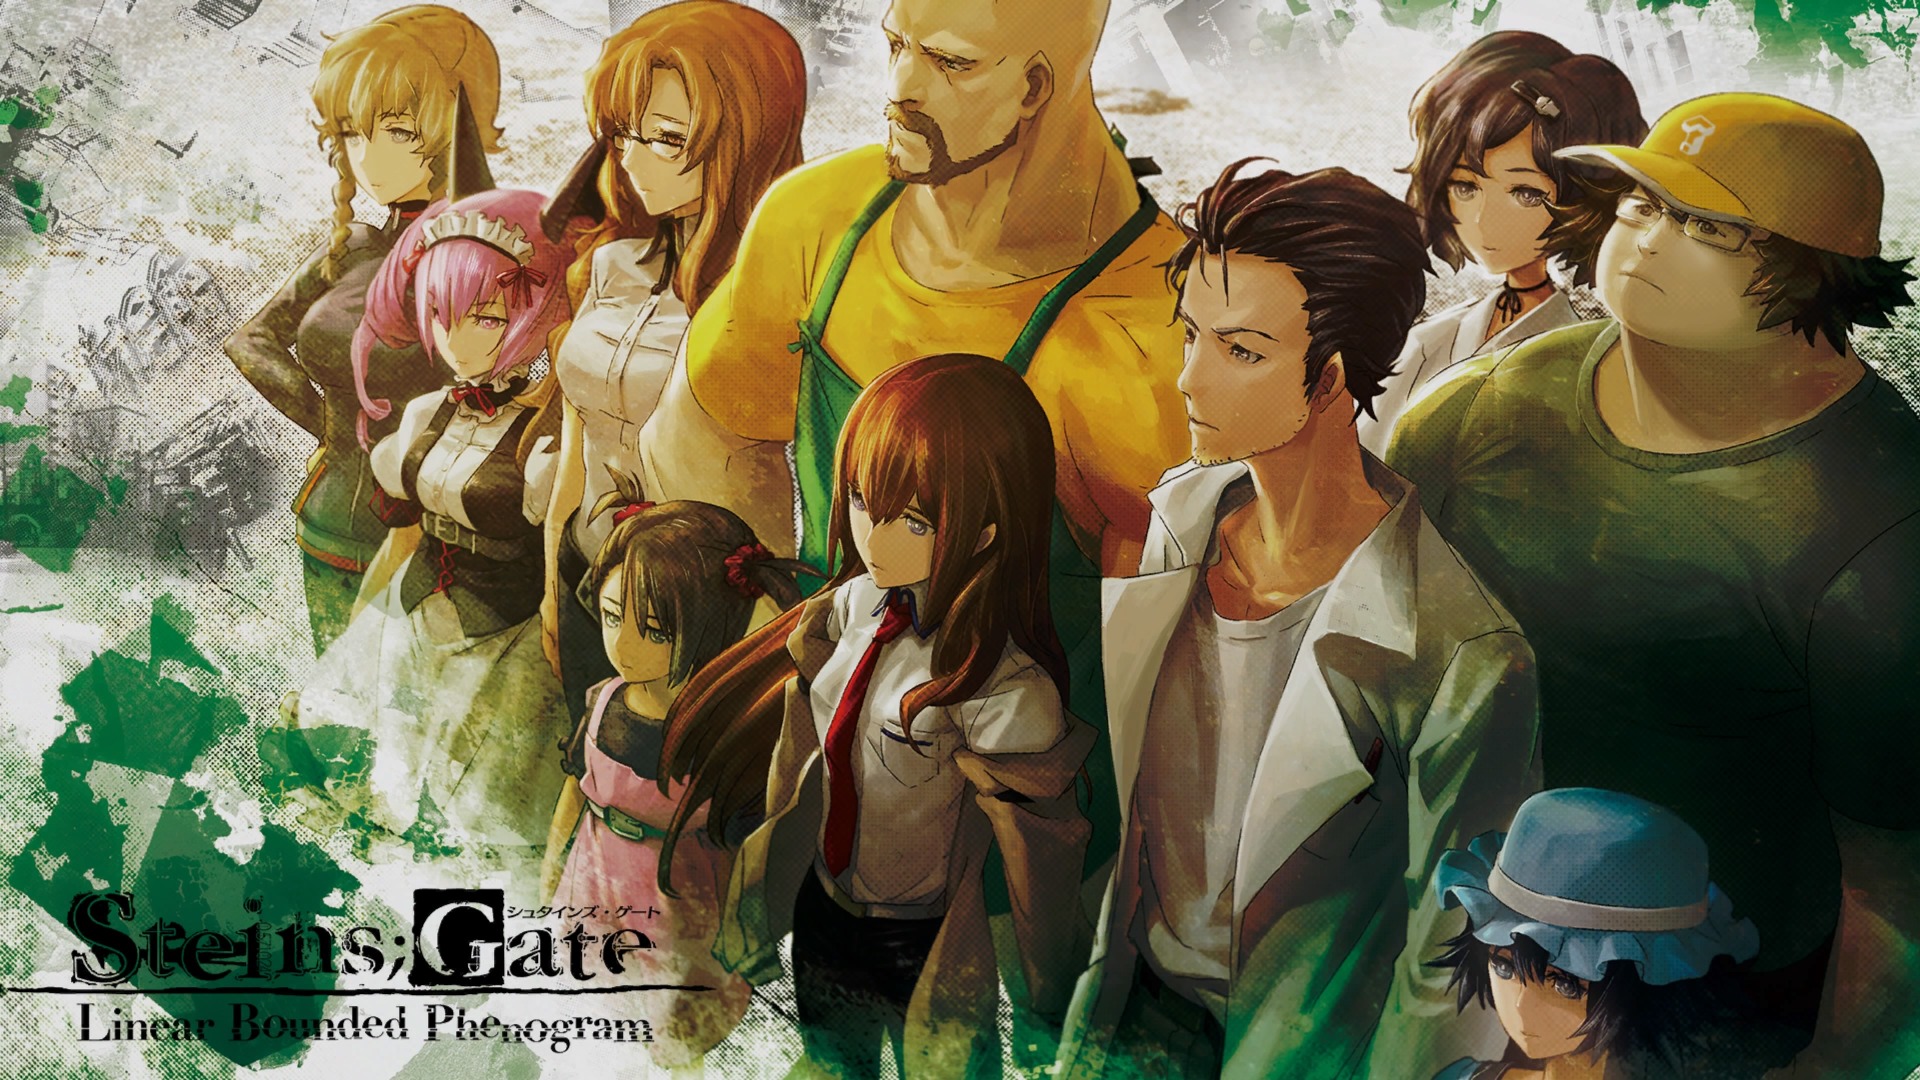 Line bound. Steins Gate Linear bounded Phenogram. Steins Gate: Senkei Kousoku no Phenogram. Linear bounded Phenogram. Steins Gate Art.